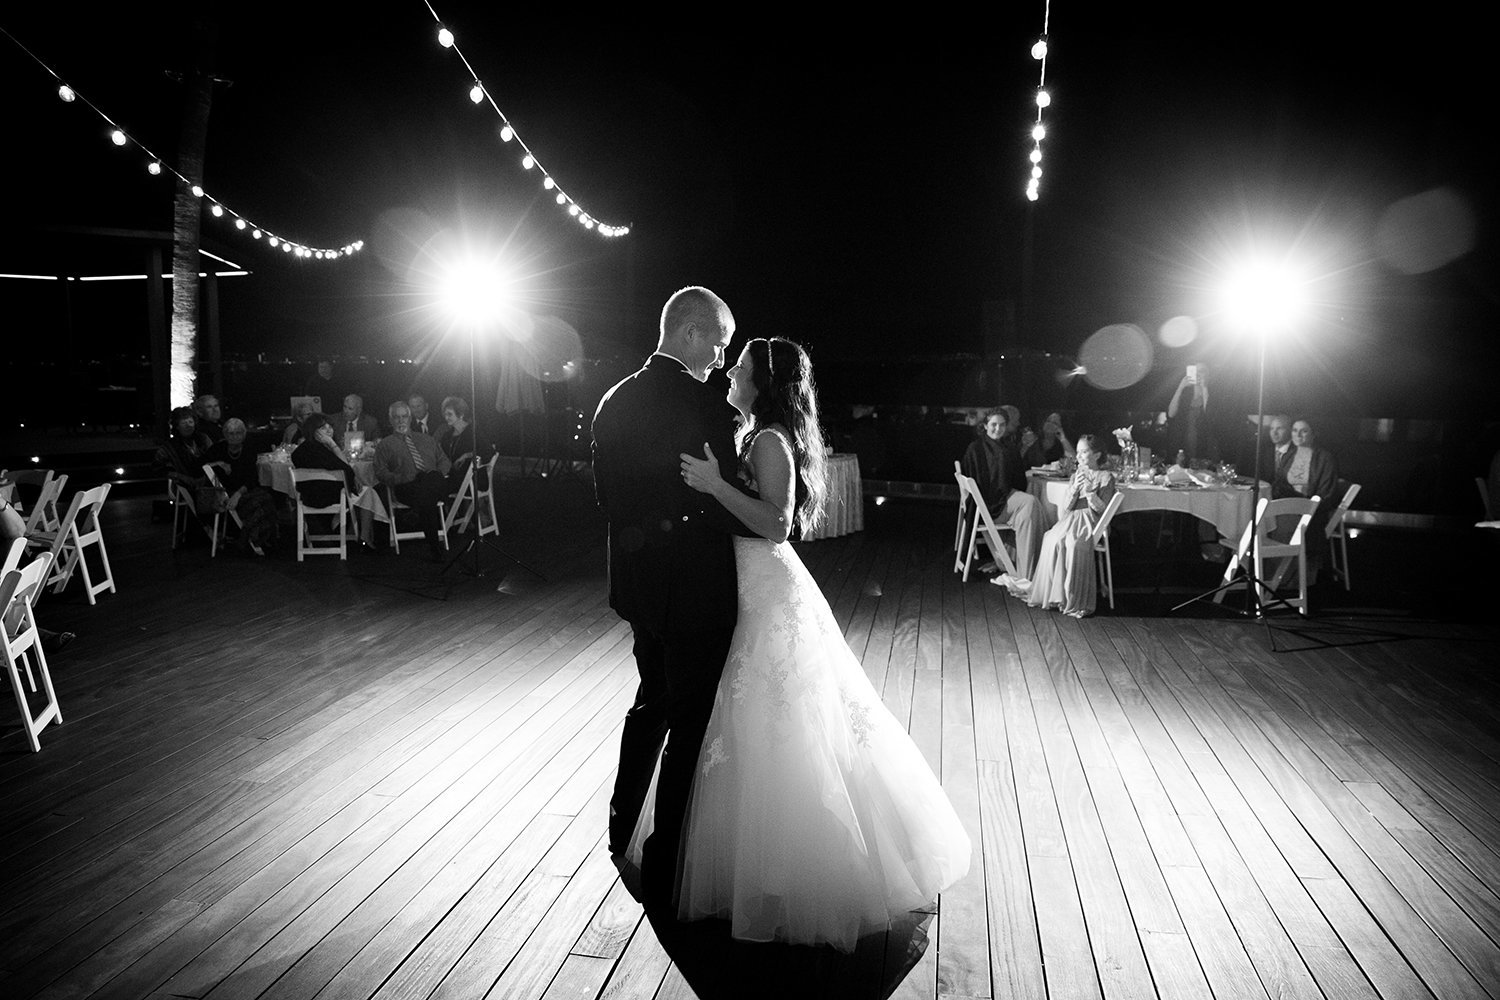 Point Loma Sub Base wedding photos first dance stunning black and white